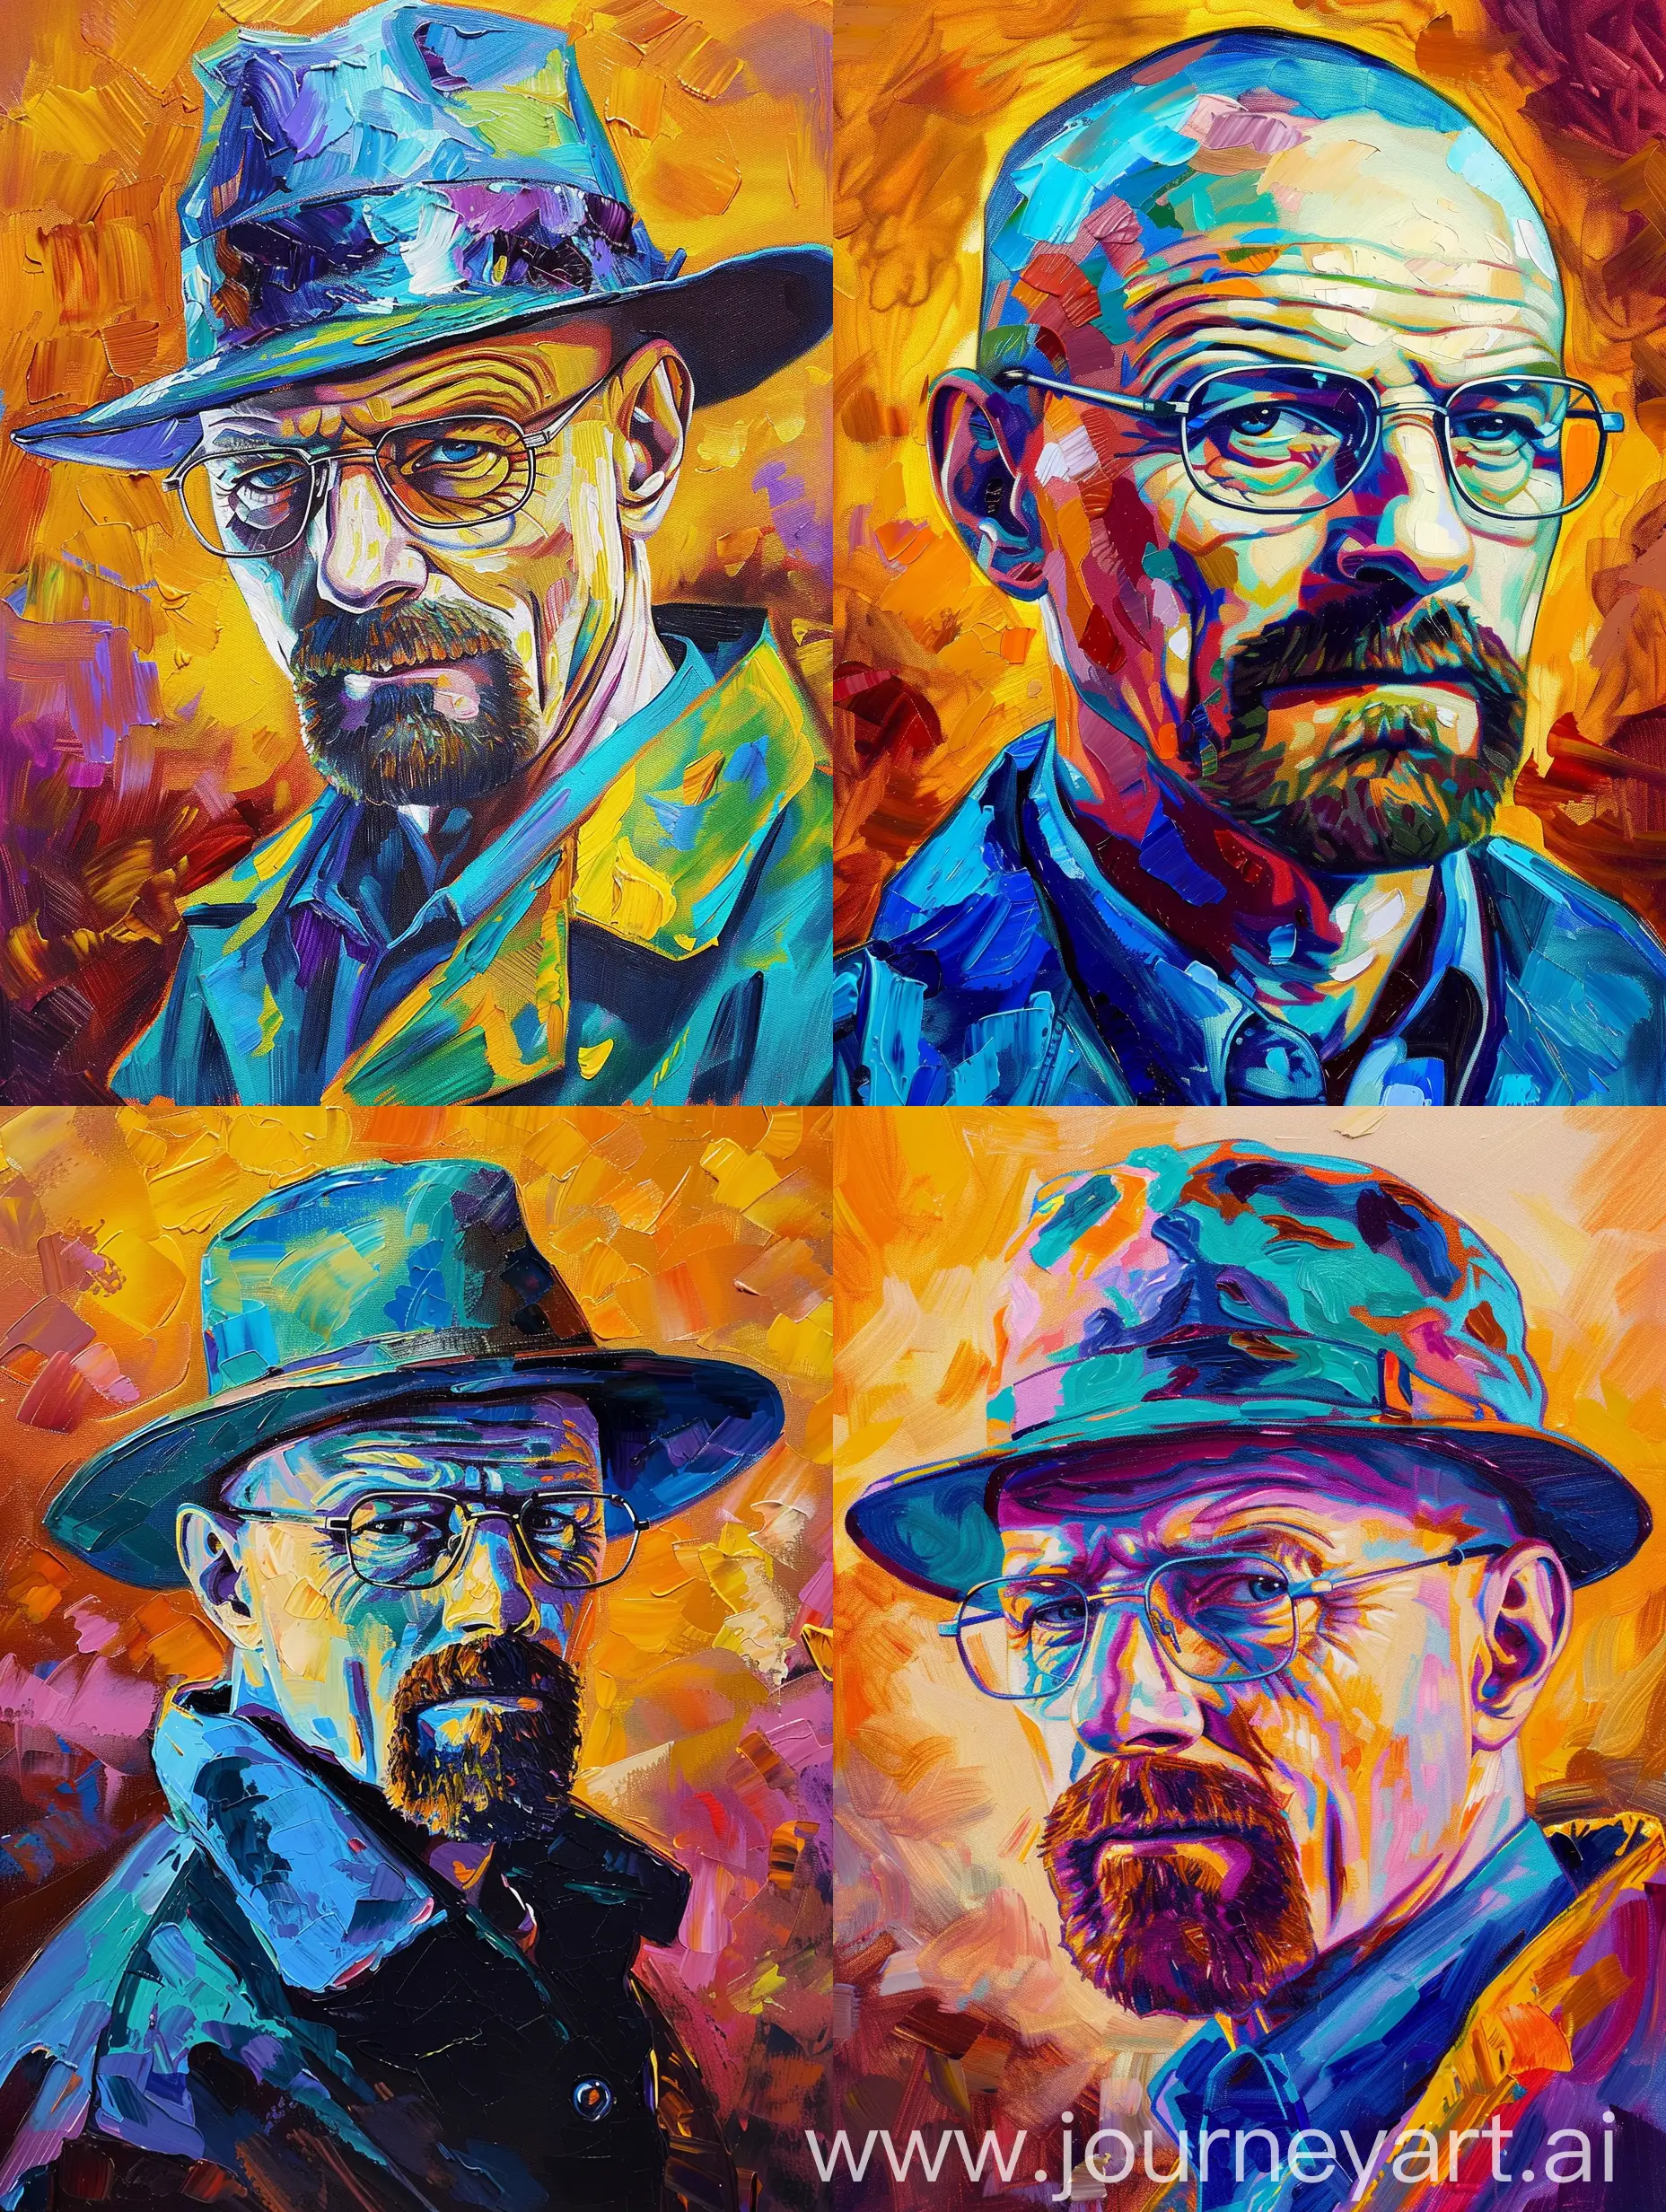 oil painting of heisenberg of breaking bad in van gogh style with soft vibrant pastel colors with warm background